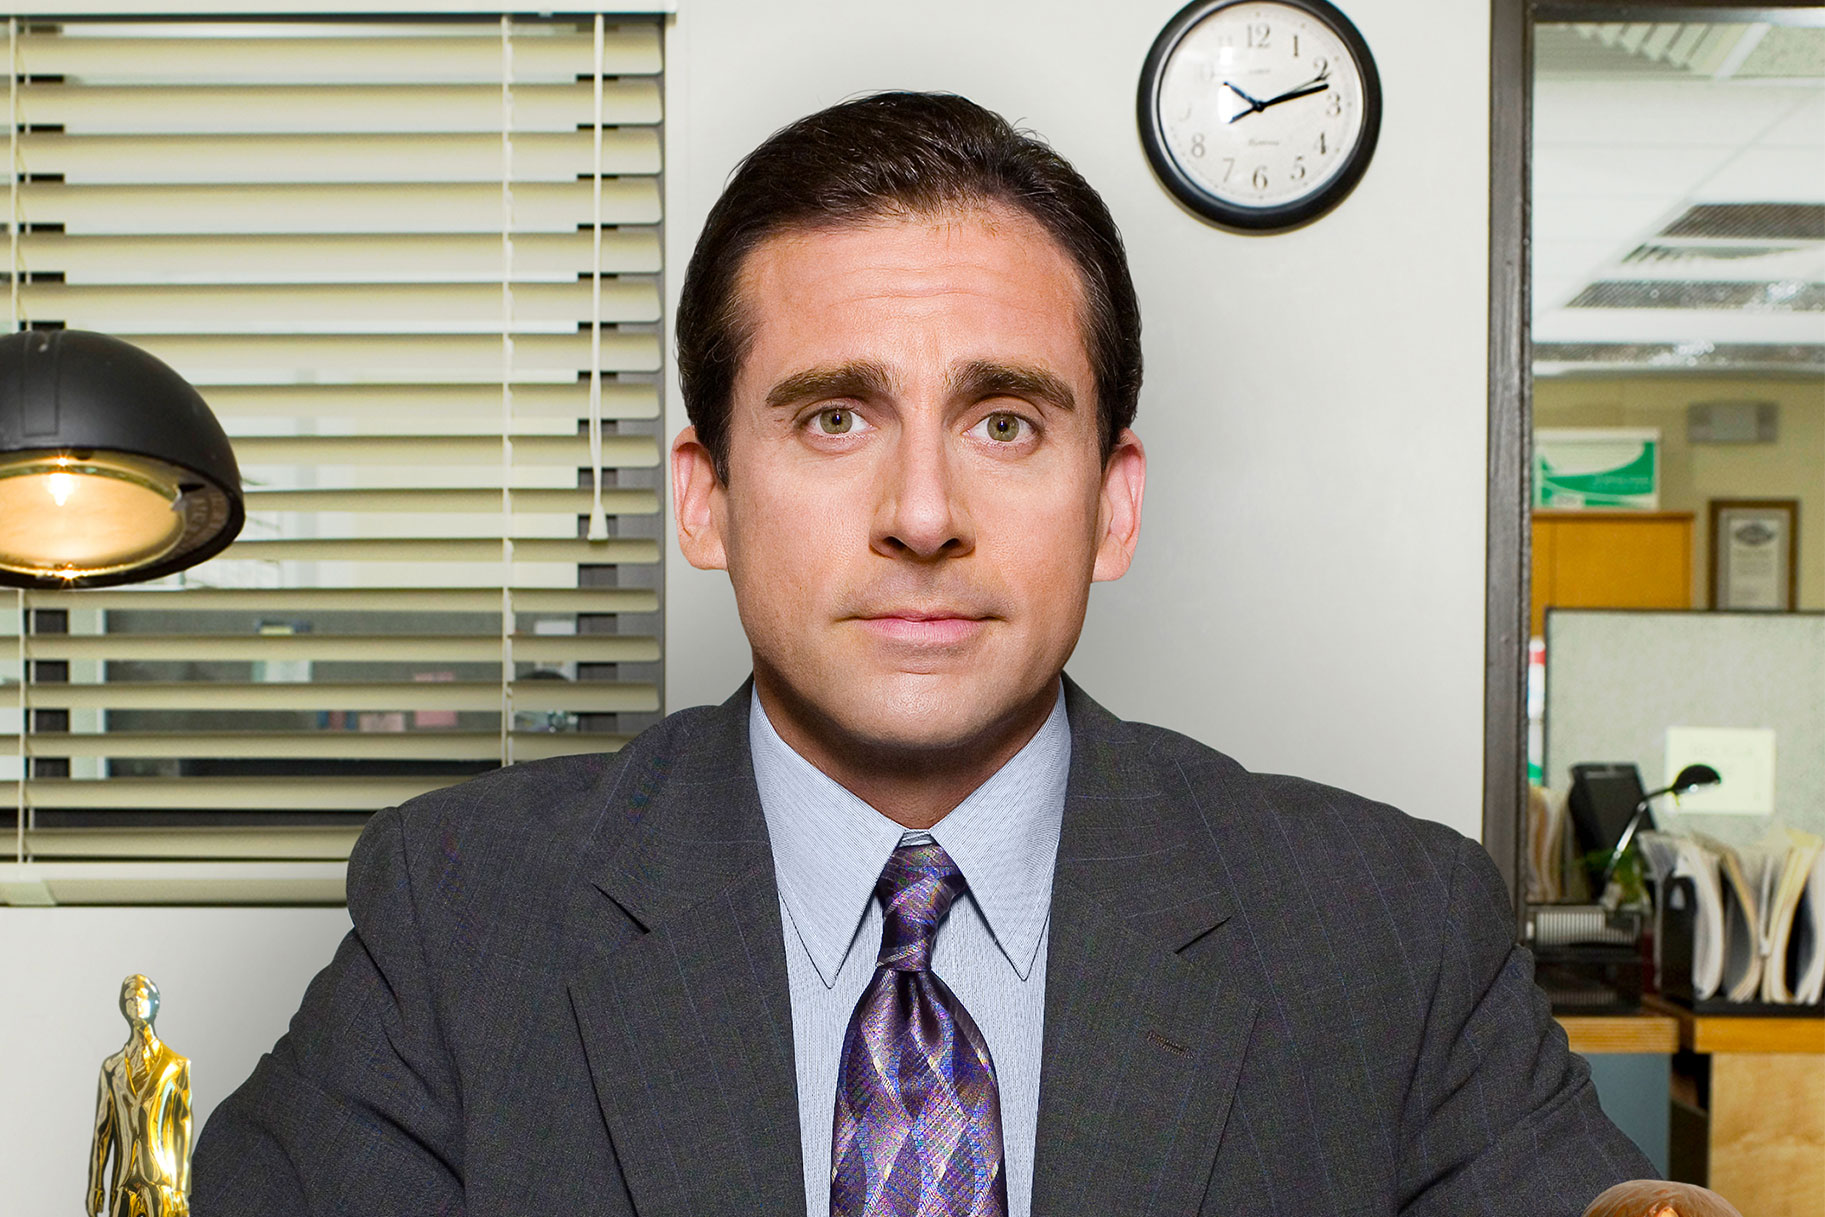 What Happened to Michael Scott on The Office? | Flipboard